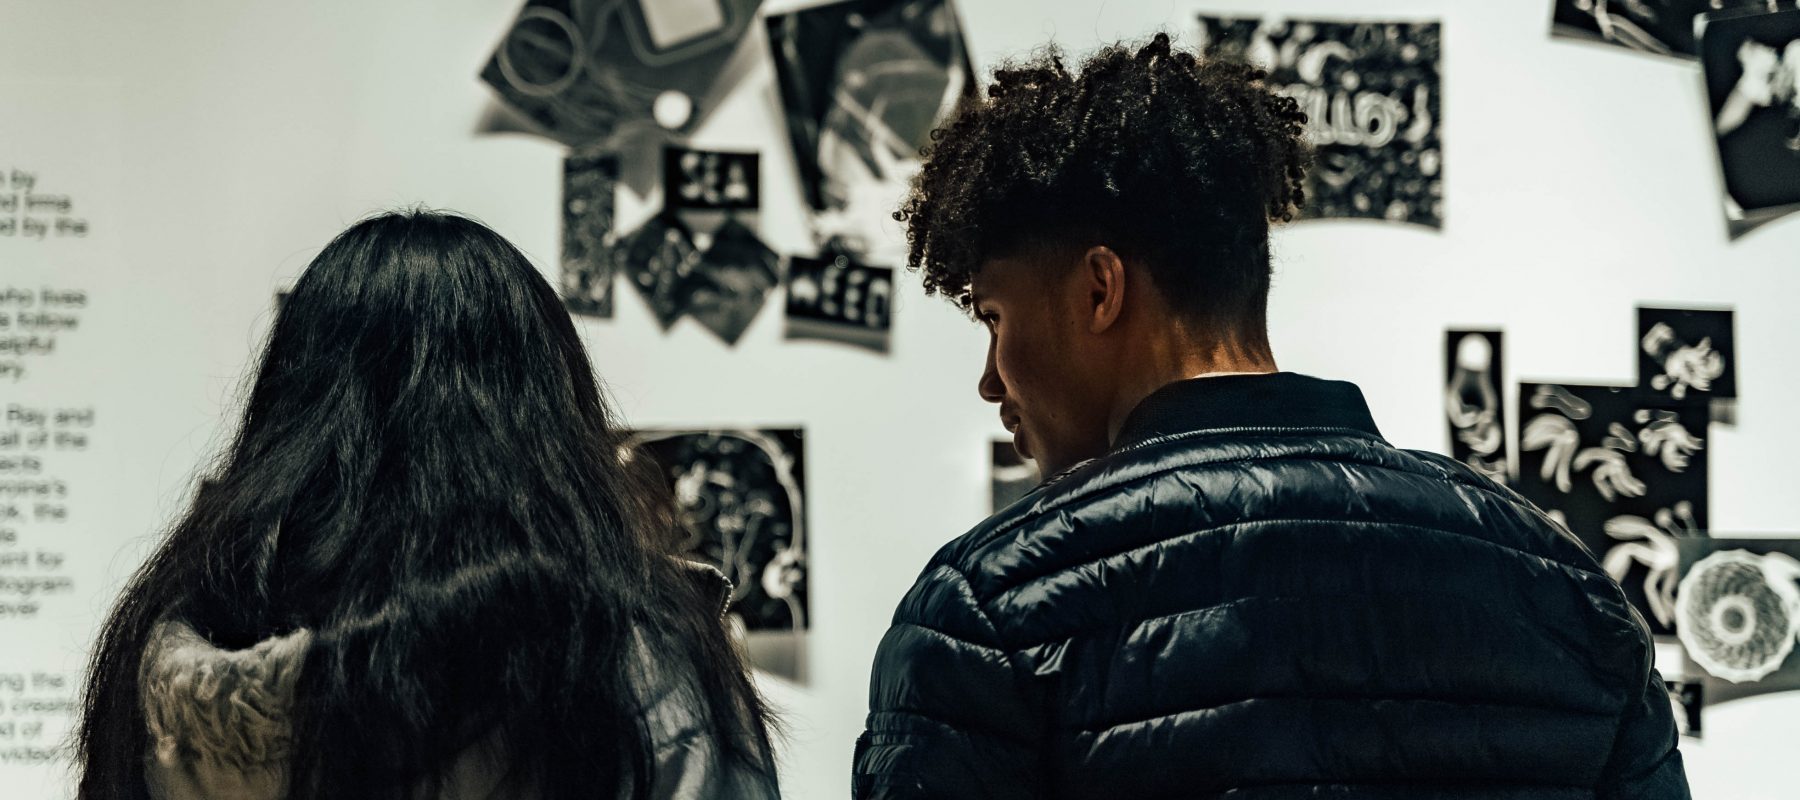 Young people look at photography in a gallery.